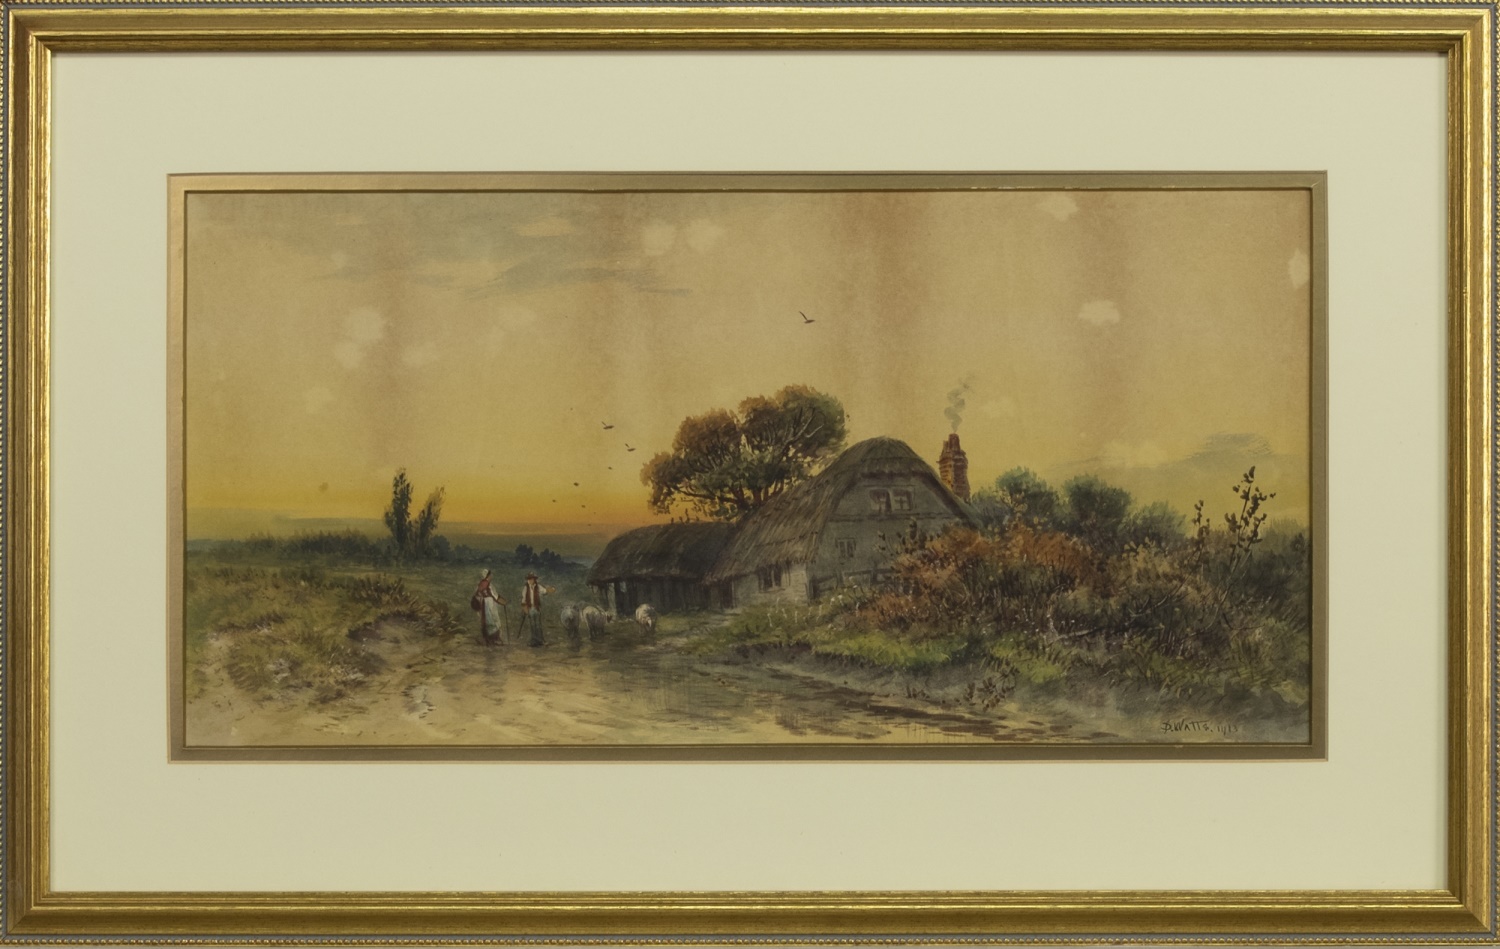 COUNTRY COTTAGE, A WATERCOLOUR BY P WATTS